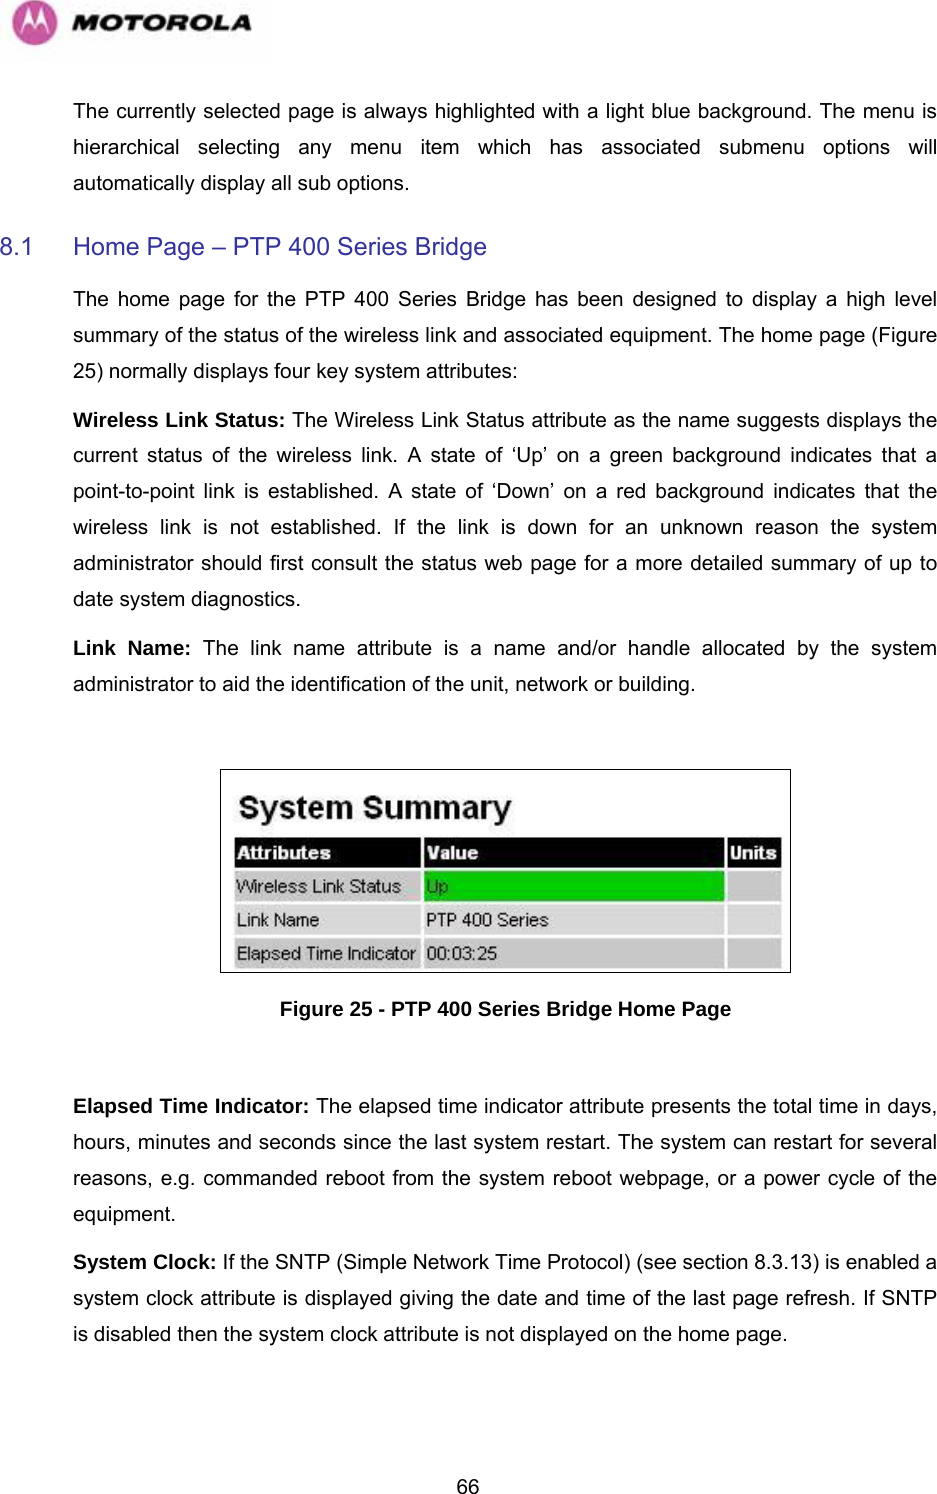   66The currently selected page is always highlighted with a light blue background. The menu is hierarchical selecting any menu item which has associated submenu options will automatically display all sub options. 8.1  Home Page – PTP 400 Series Bridge The home page for the PTP 400 Series Bridge has been designed to display a high level summary of the status of the wireless link and associated equipment. The home page (Figure 25) normally displays four key system attributes: Wireless Link Status: The Wireless Link Status attribute as the name suggests displays the current status of the wireless link. A state of ‘Up’ on a green background indicates that a point-to-point link is established. A state of ‘Down’ on a red background indicates that the wireless link is not established. If the link is down for an unknown reason the system administrator should first consult the status web page for a more detailed summary of up to date system diagnostics.  Link Name: The link name attribute is a name and/or handle allocated by the system administrator to aid the identification of the unit, network or building.    Figure 25 - PTP 400 Series Bridge Home Page  Elapsed Time Indicator: The elapsed time indicator attribute presents the total time in days, hours, minutes and seconds since the last system restart. The system can restart for several reasons, e.g. commanded reboot from the system reboot webpage, or a power cycle of the equipment.  System Clock: If the SNTP (Simple Network Time Protocol) (see section 8.3.13) is enabled a system clock attribute is displayed giving the date and time of the last page refresh. If SNTP is disabled then the system clock attribute is not displayed on the home page. 